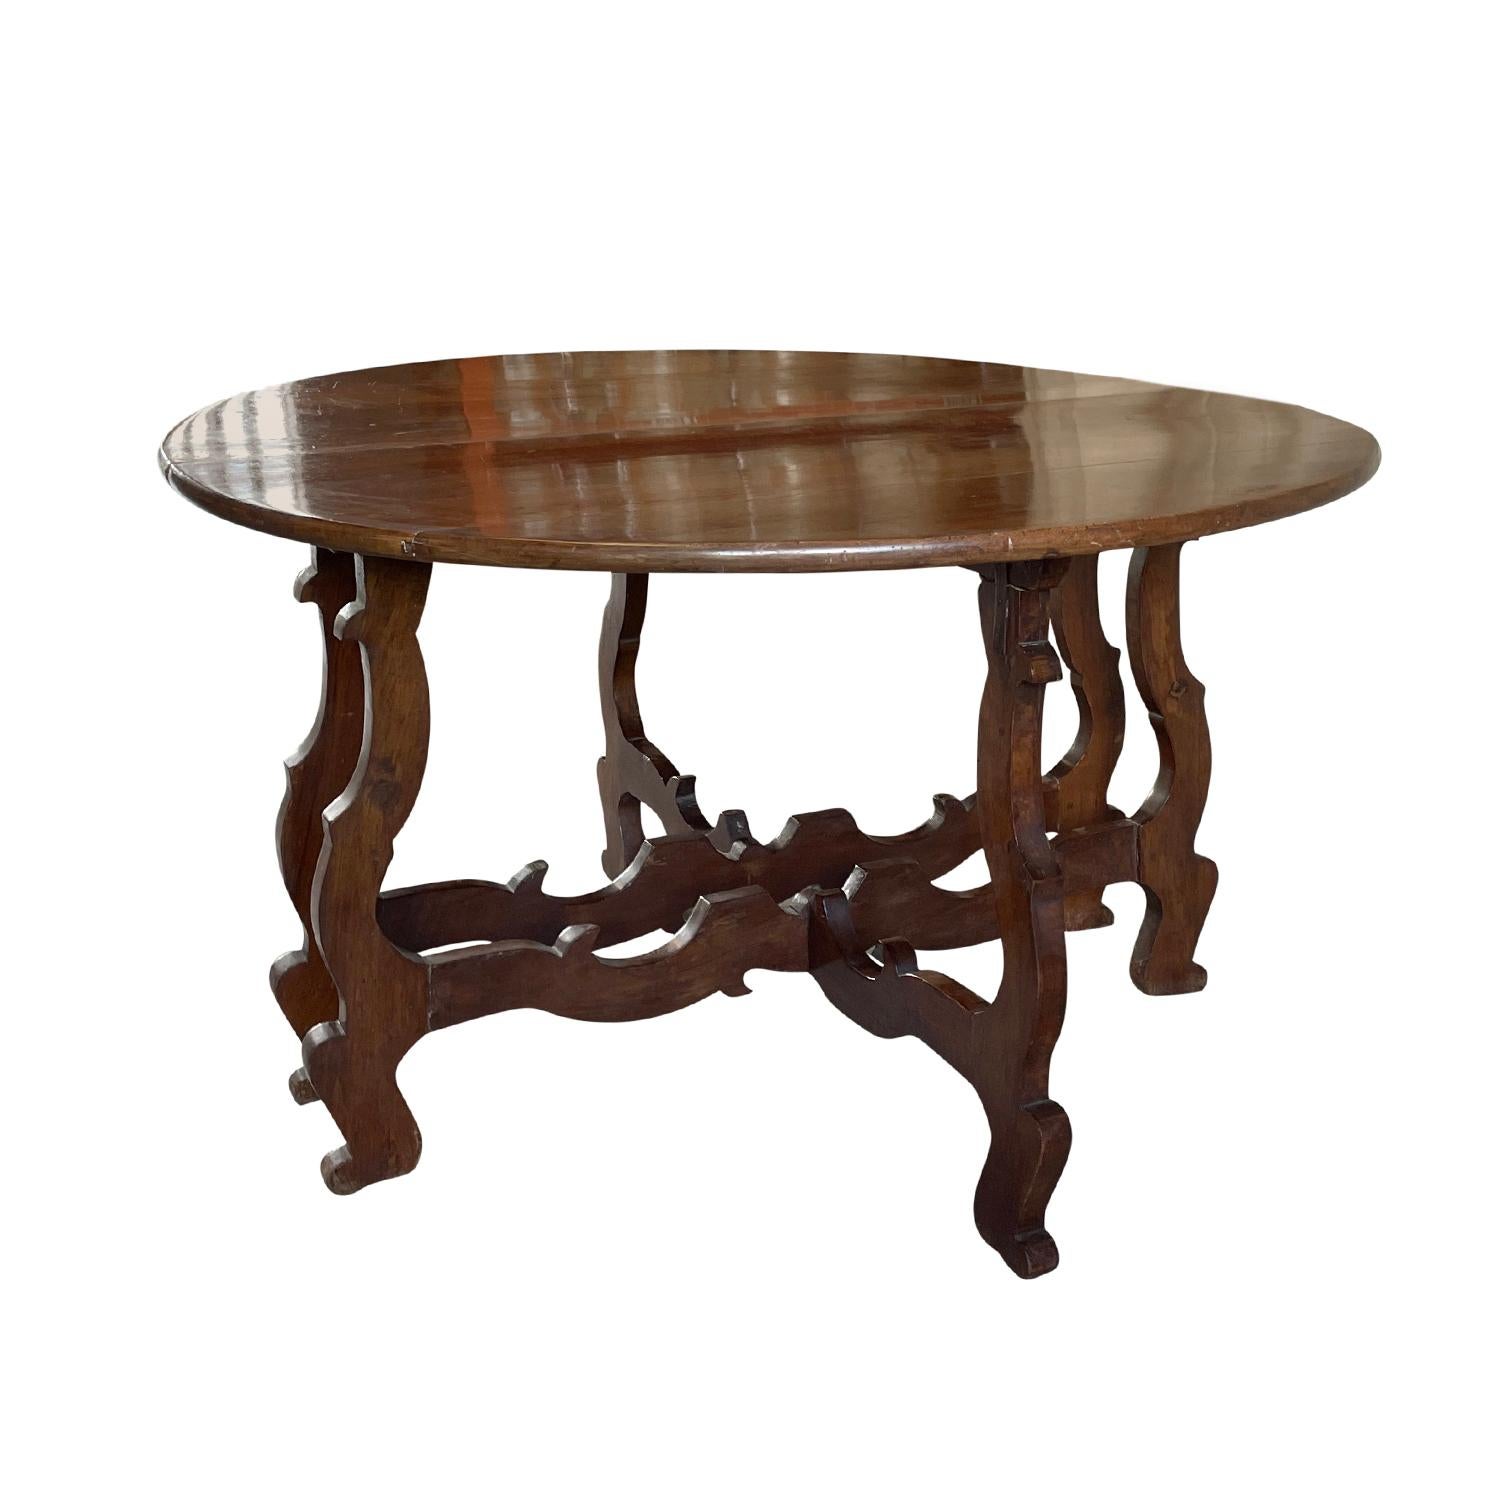 A pair of 18th century Tuscan Baroque tables or wall consoles in warm colored waxed finished Walnut wood with a wonderful grain, in good condition. These freestanding Italian demi-lune consoles have an elaborated design and the scroll elements are